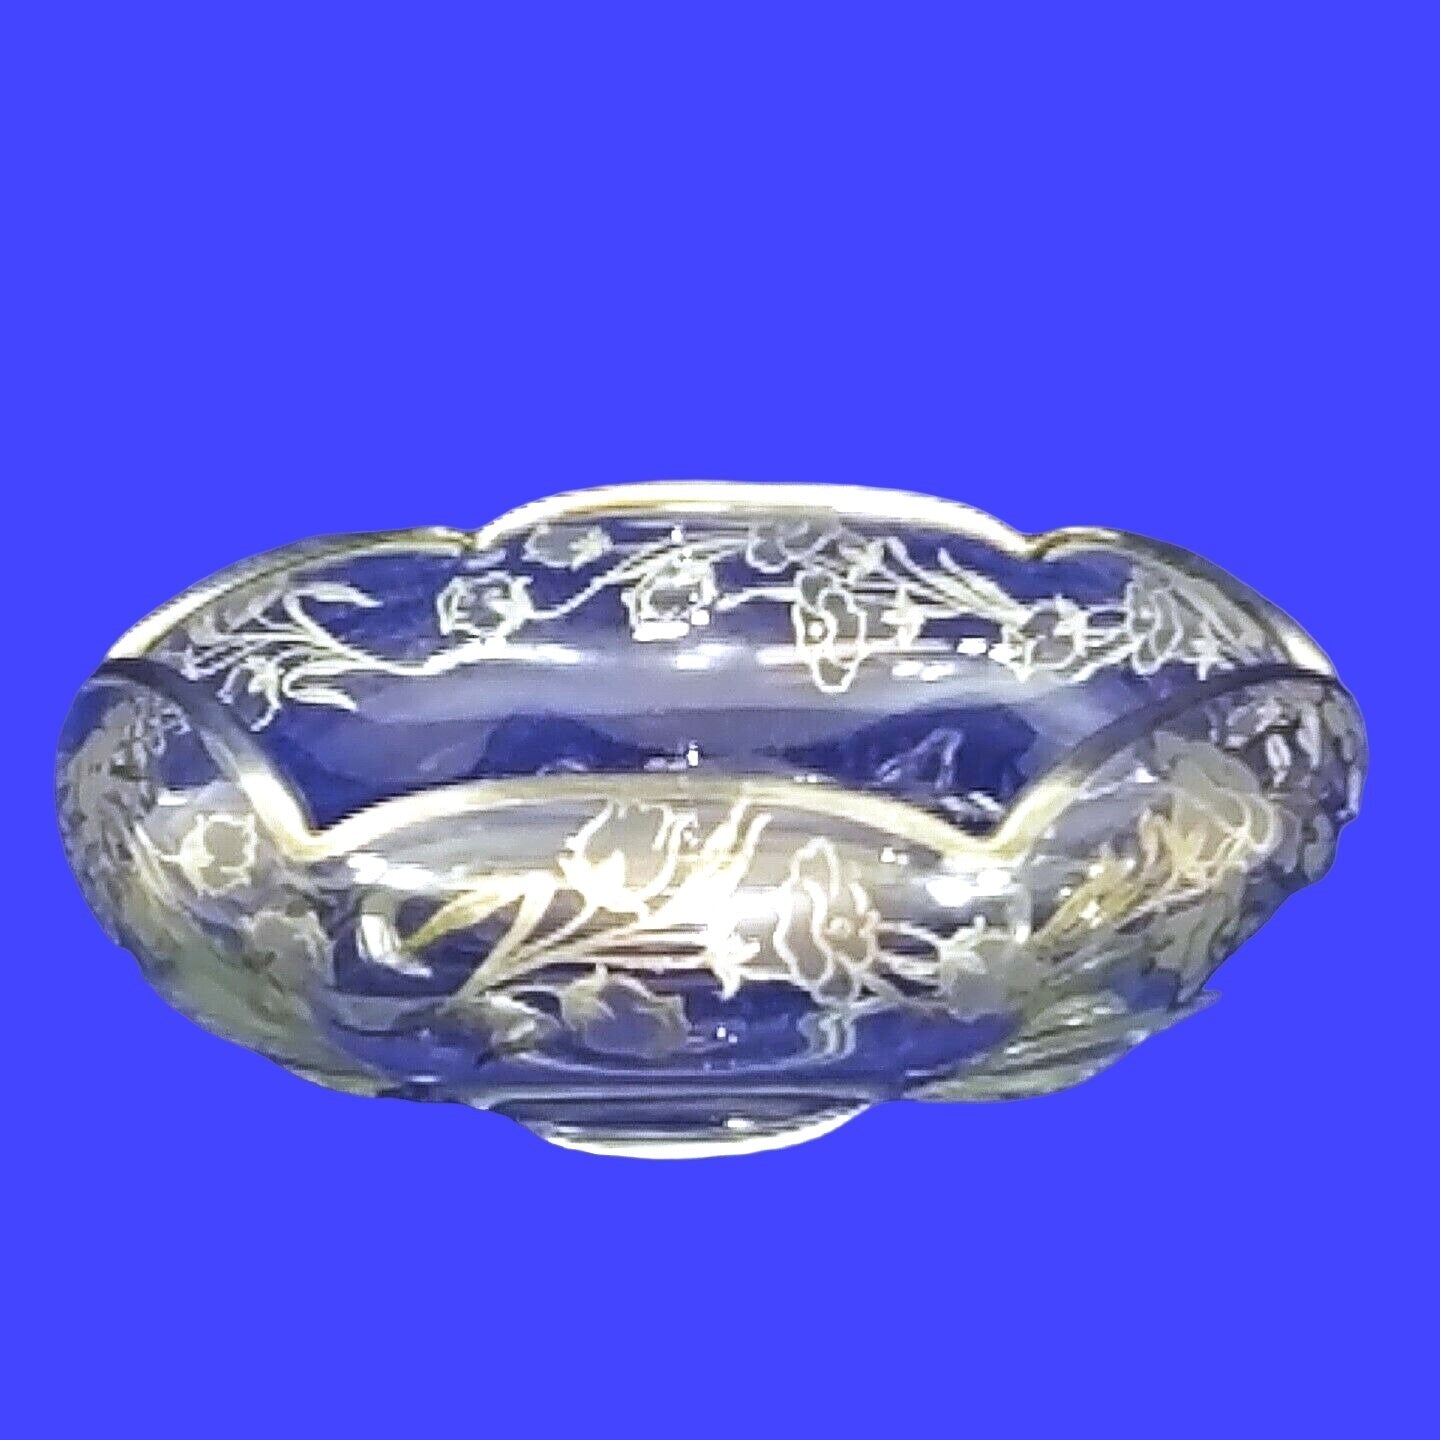 Candy Dish Vintage Glass Silver Plated Floral and Trim Collectible Home Decor